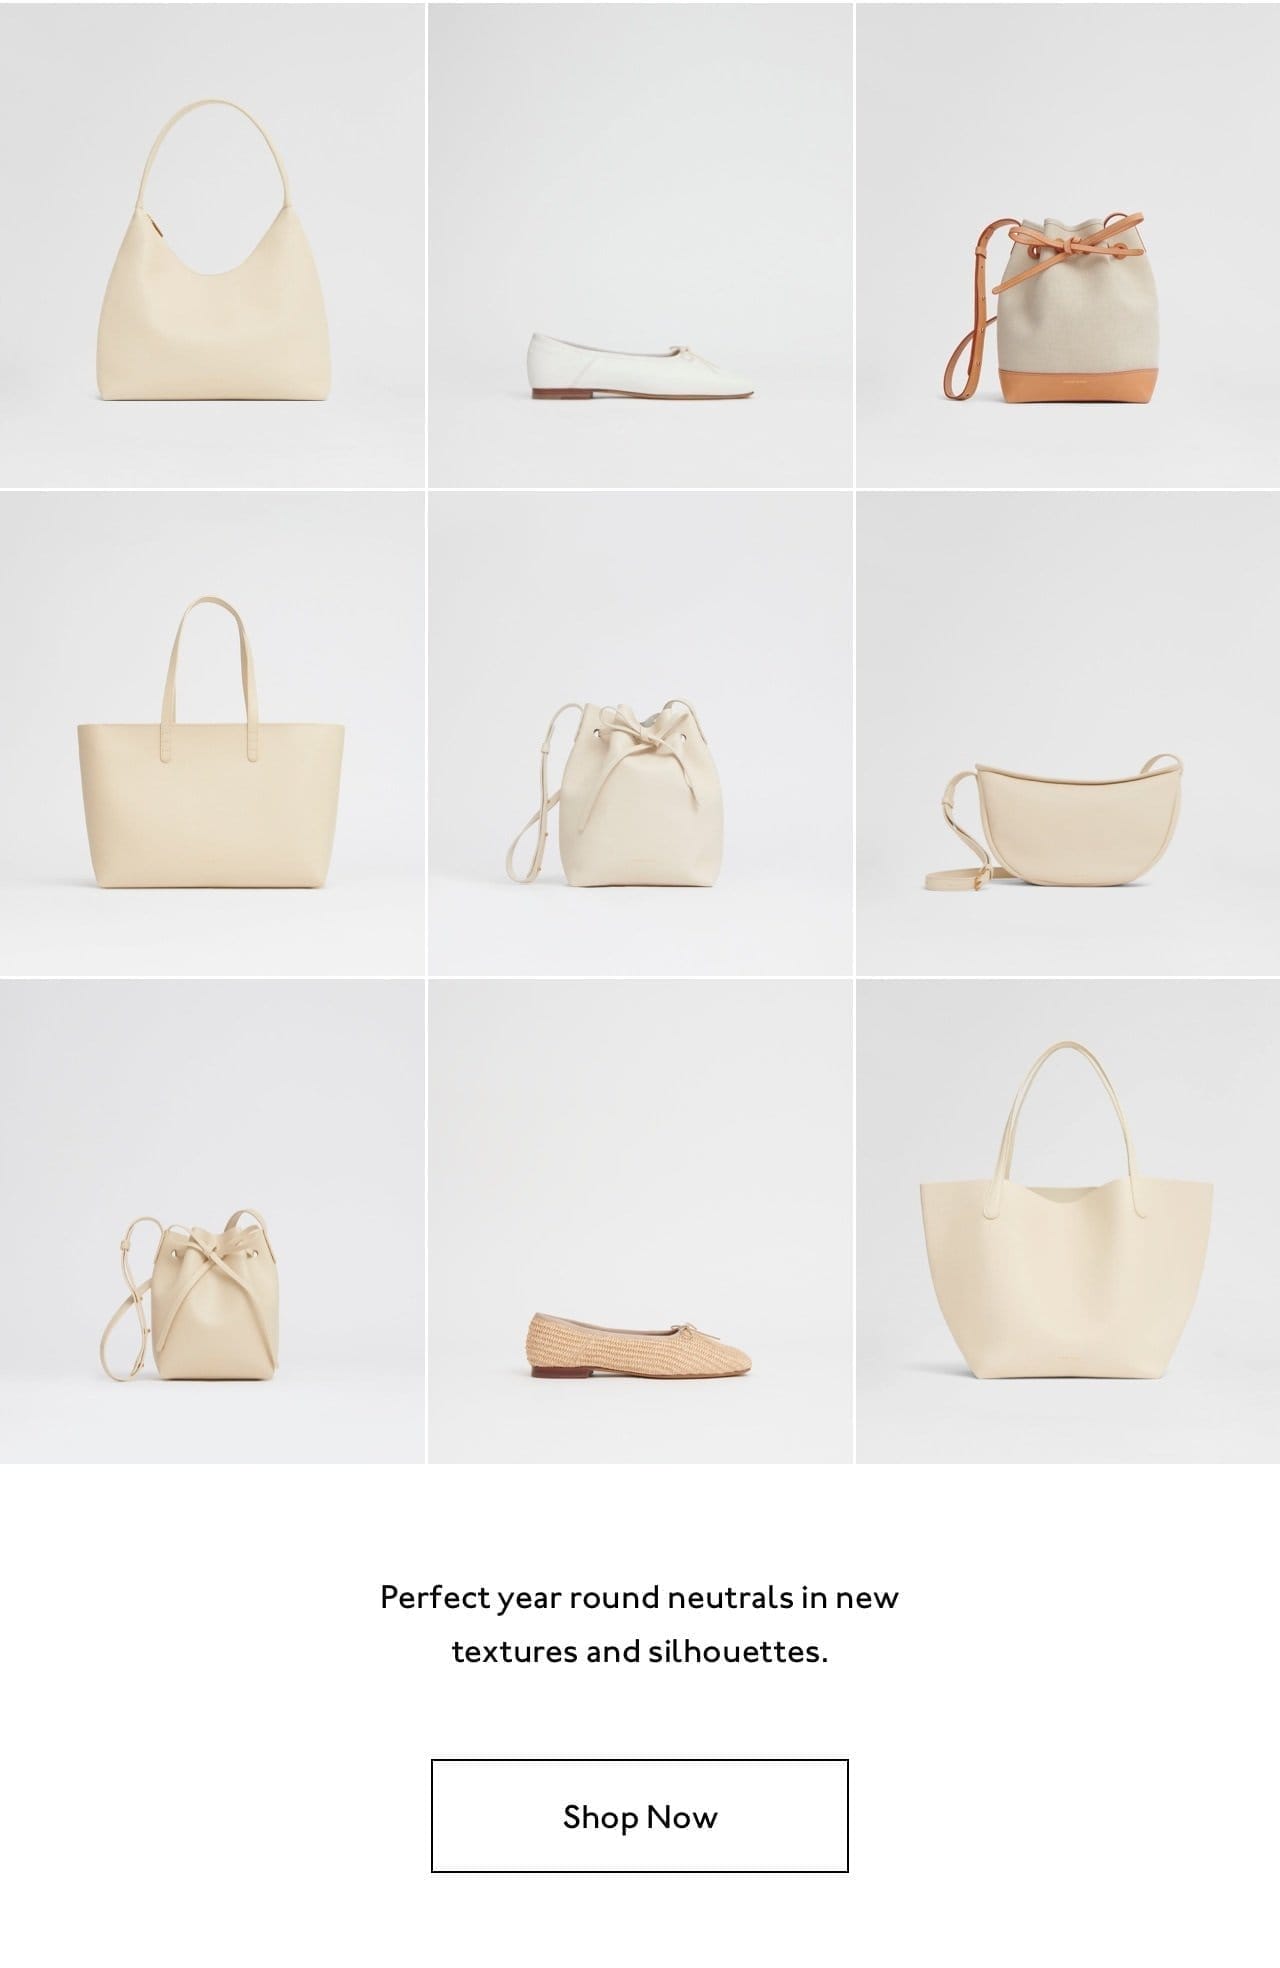 Perfect year round neutrals in new textures and silhouettes. Shop bags and shoes now.